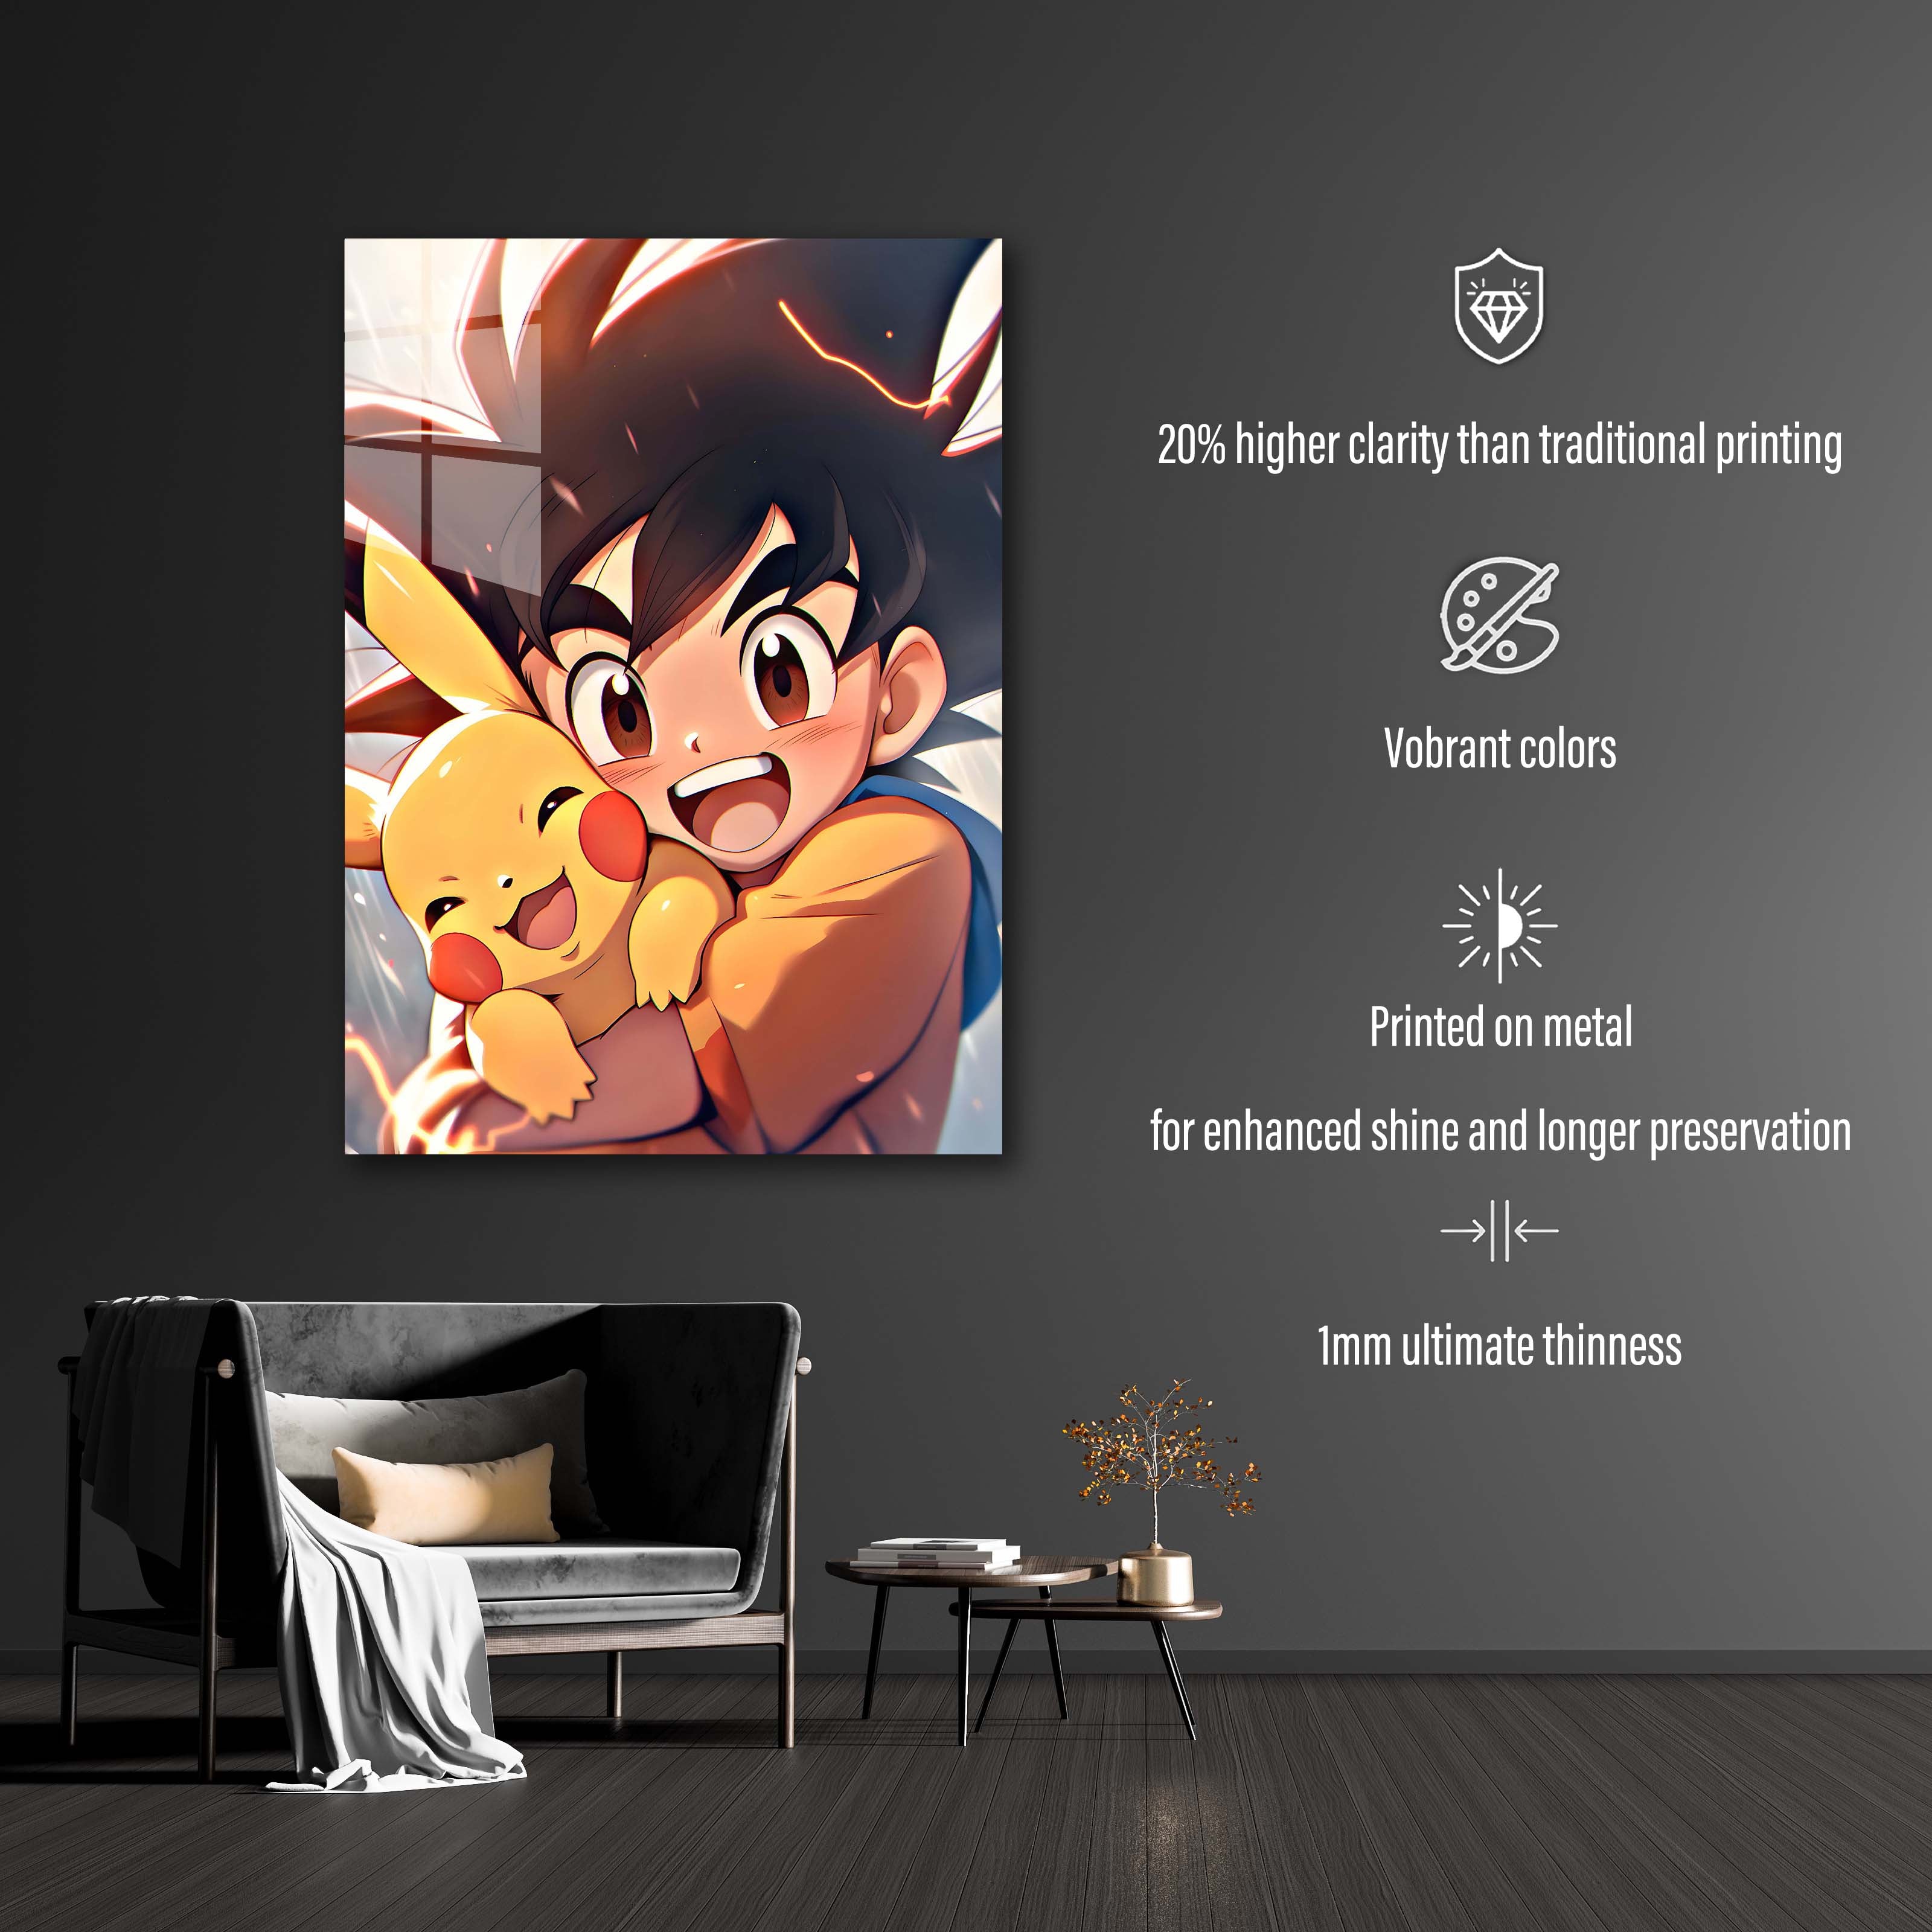 Goku with Cute Pikachu-designed by @Vid_M@tion